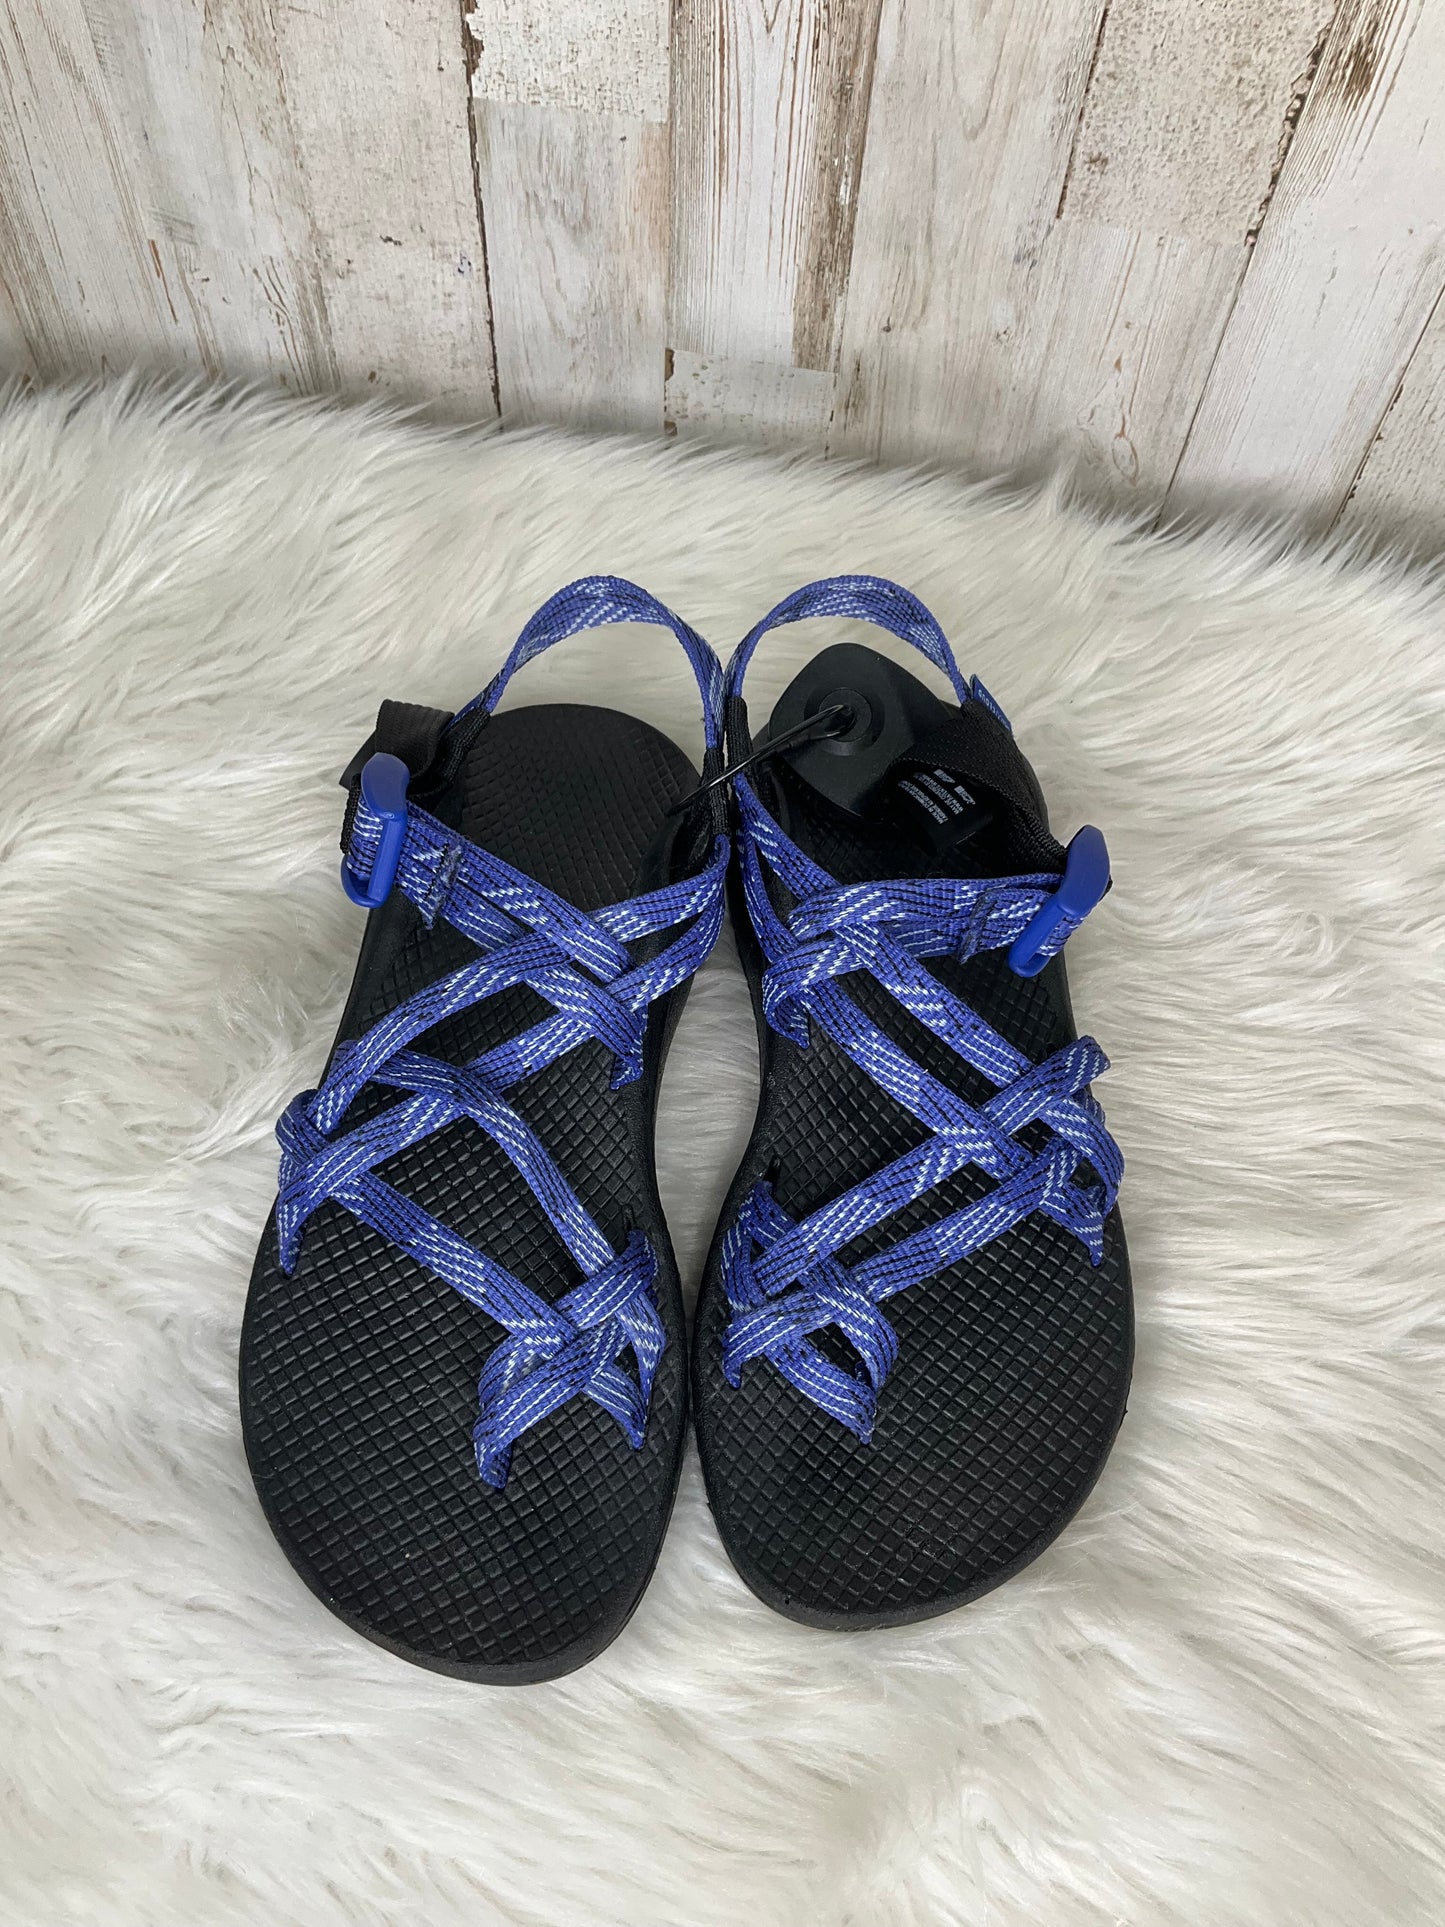 Blue Sandals Flats Chacos, Size 7